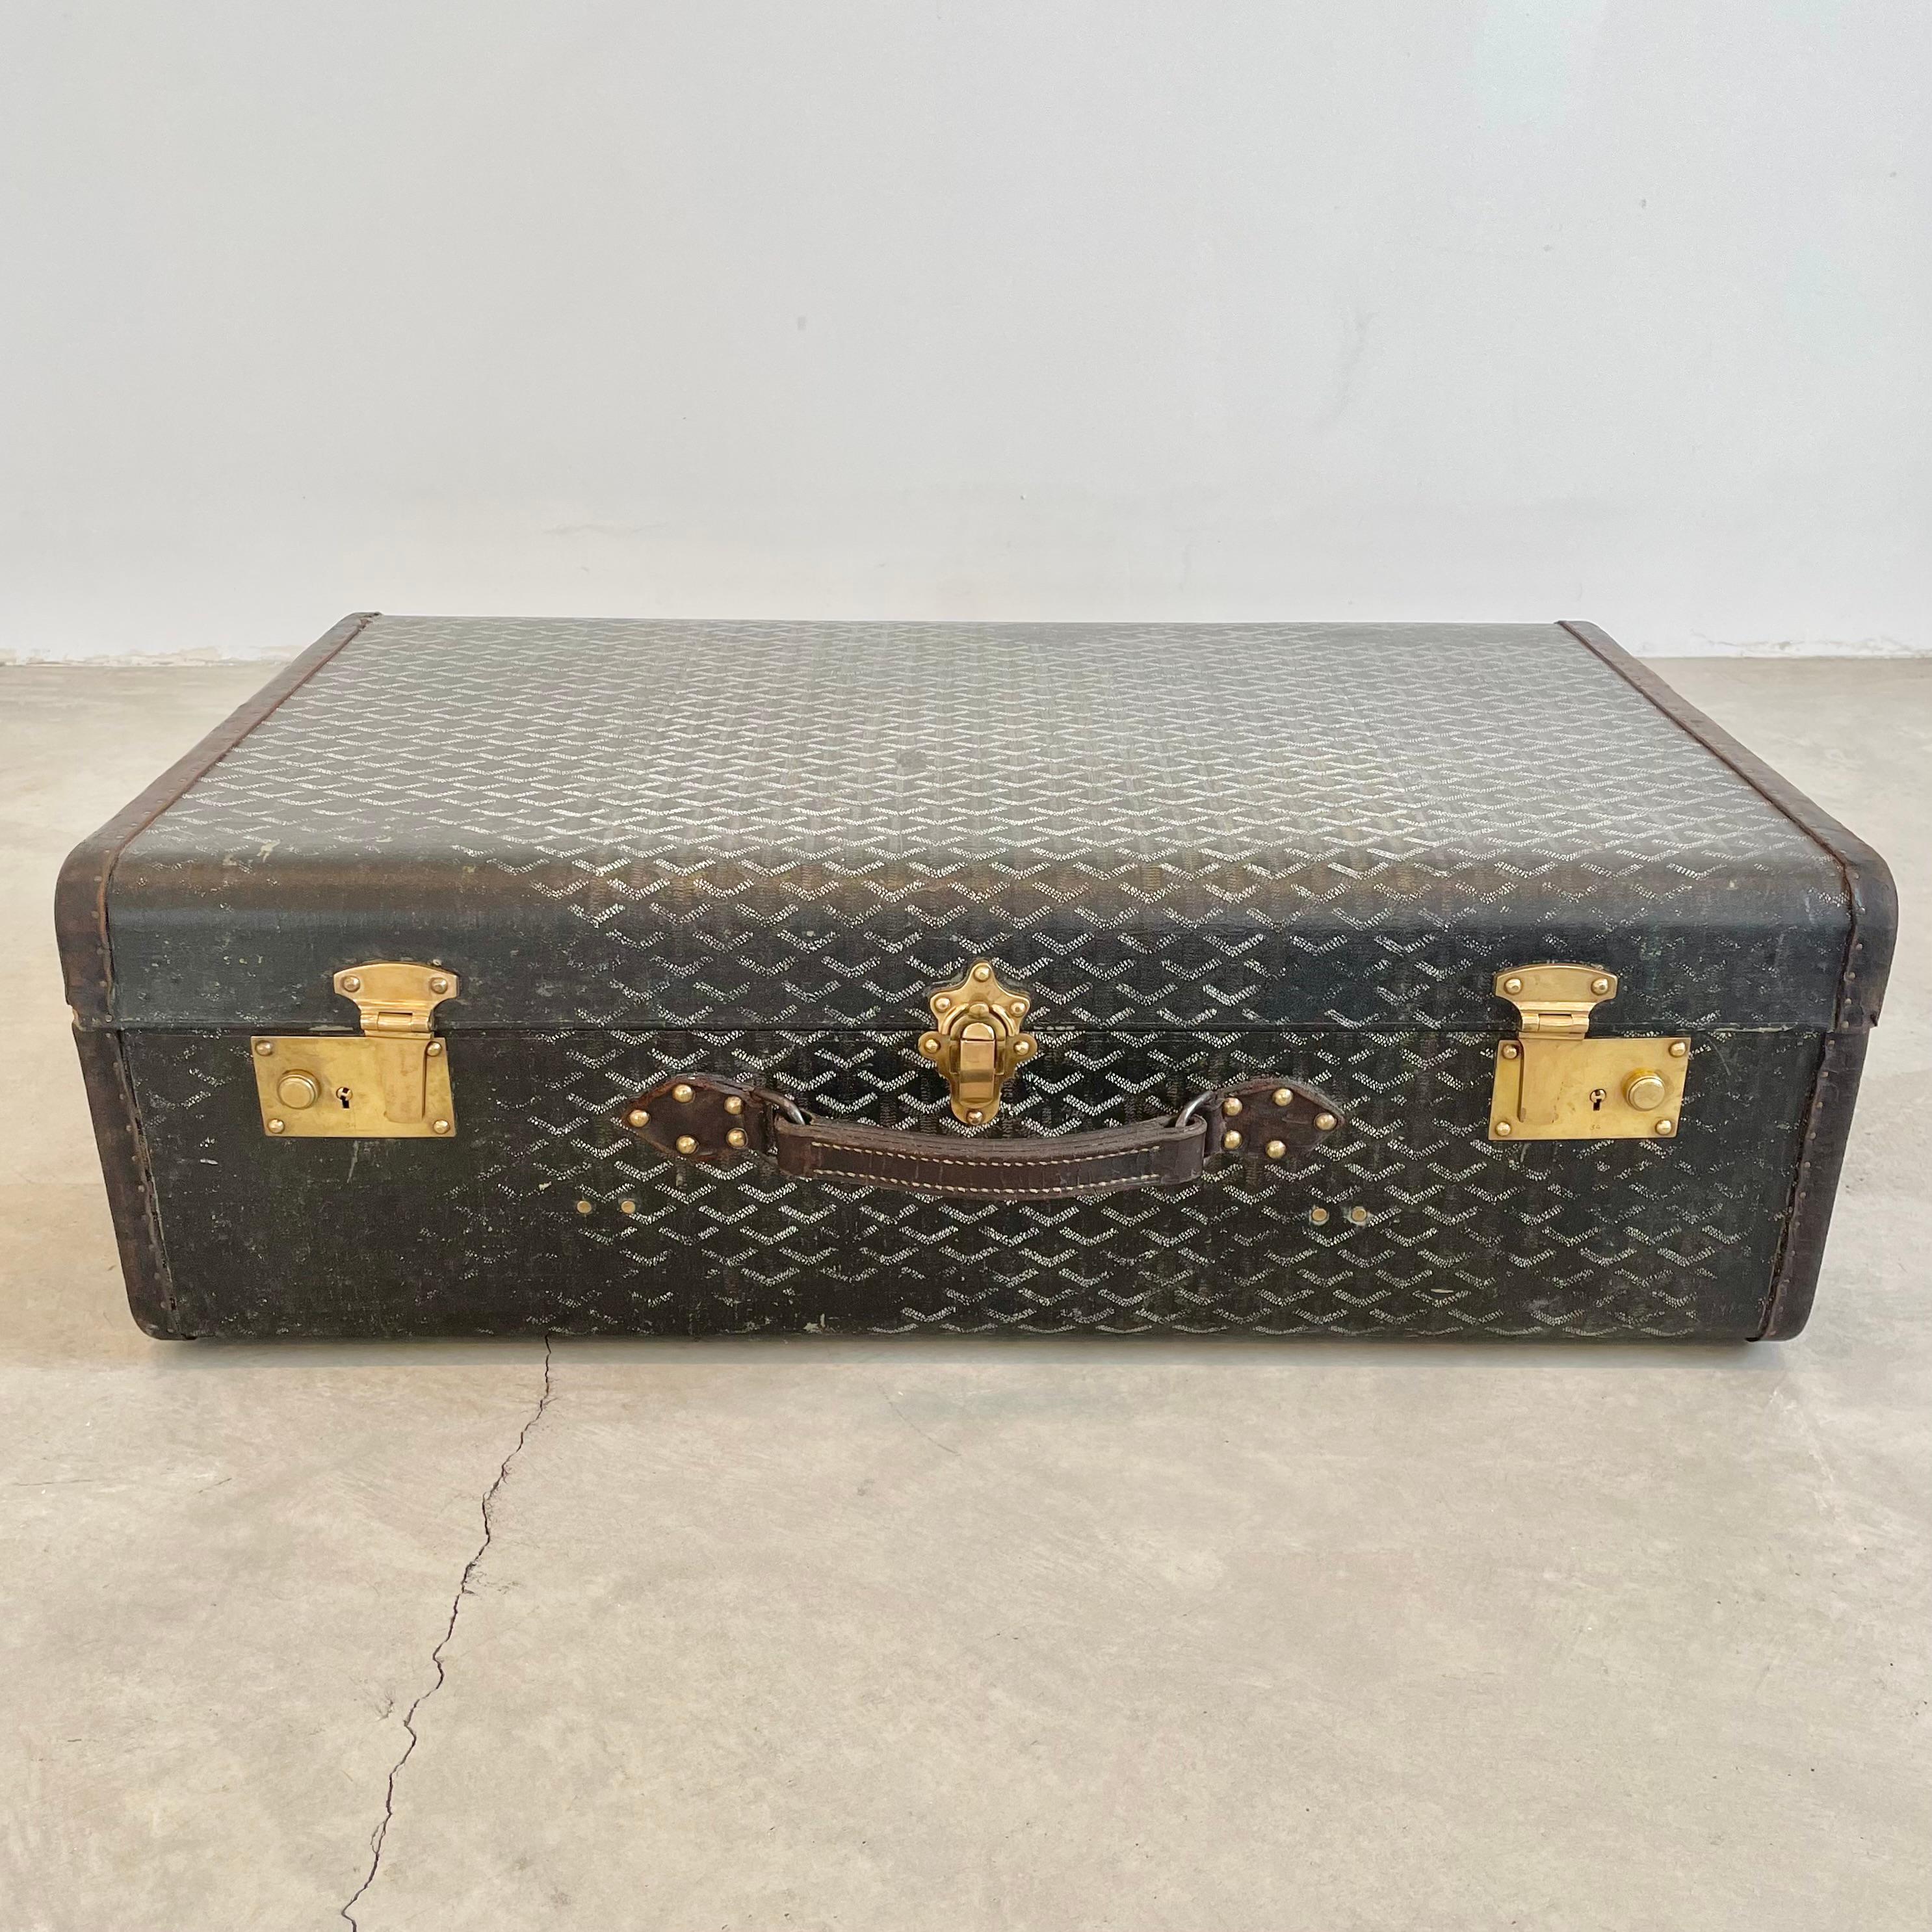 Classic vintage Goyard trunk. Wooden frame wrapped in the iconic Goyard canvas print with saddle leather and brass hardware. Incredible patina and coloring to leather and canvas. Timeless simplicity in design and iconic badging have made this brand